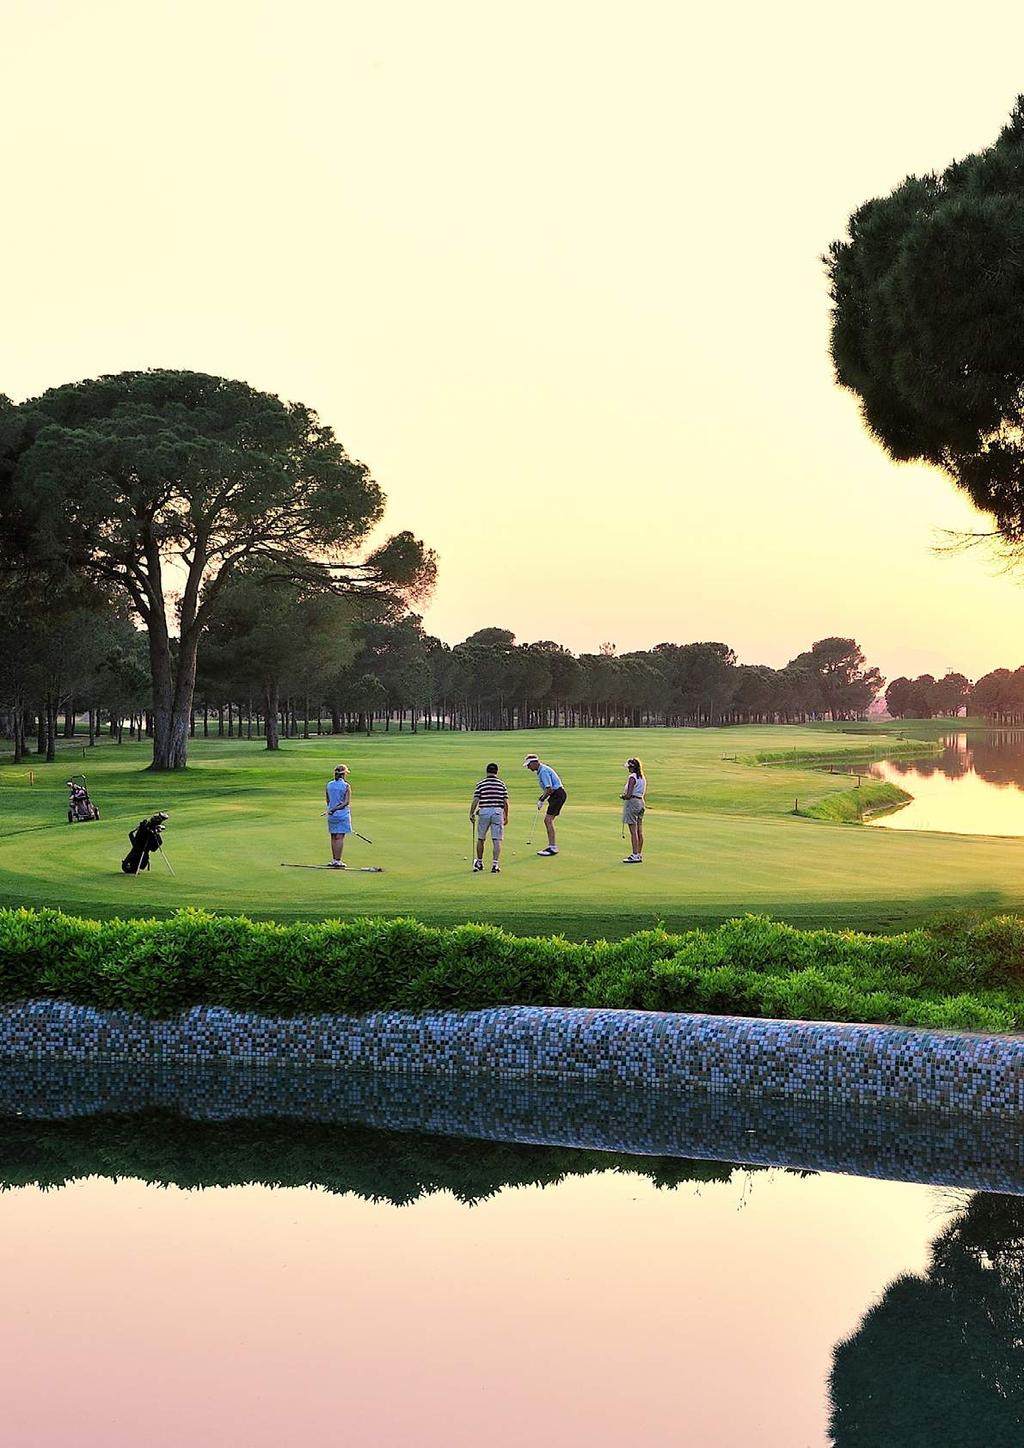 20 TURKEY When it comes to luxury all inclusive holidays with Championship golf, Turkey stands apart from the rest.